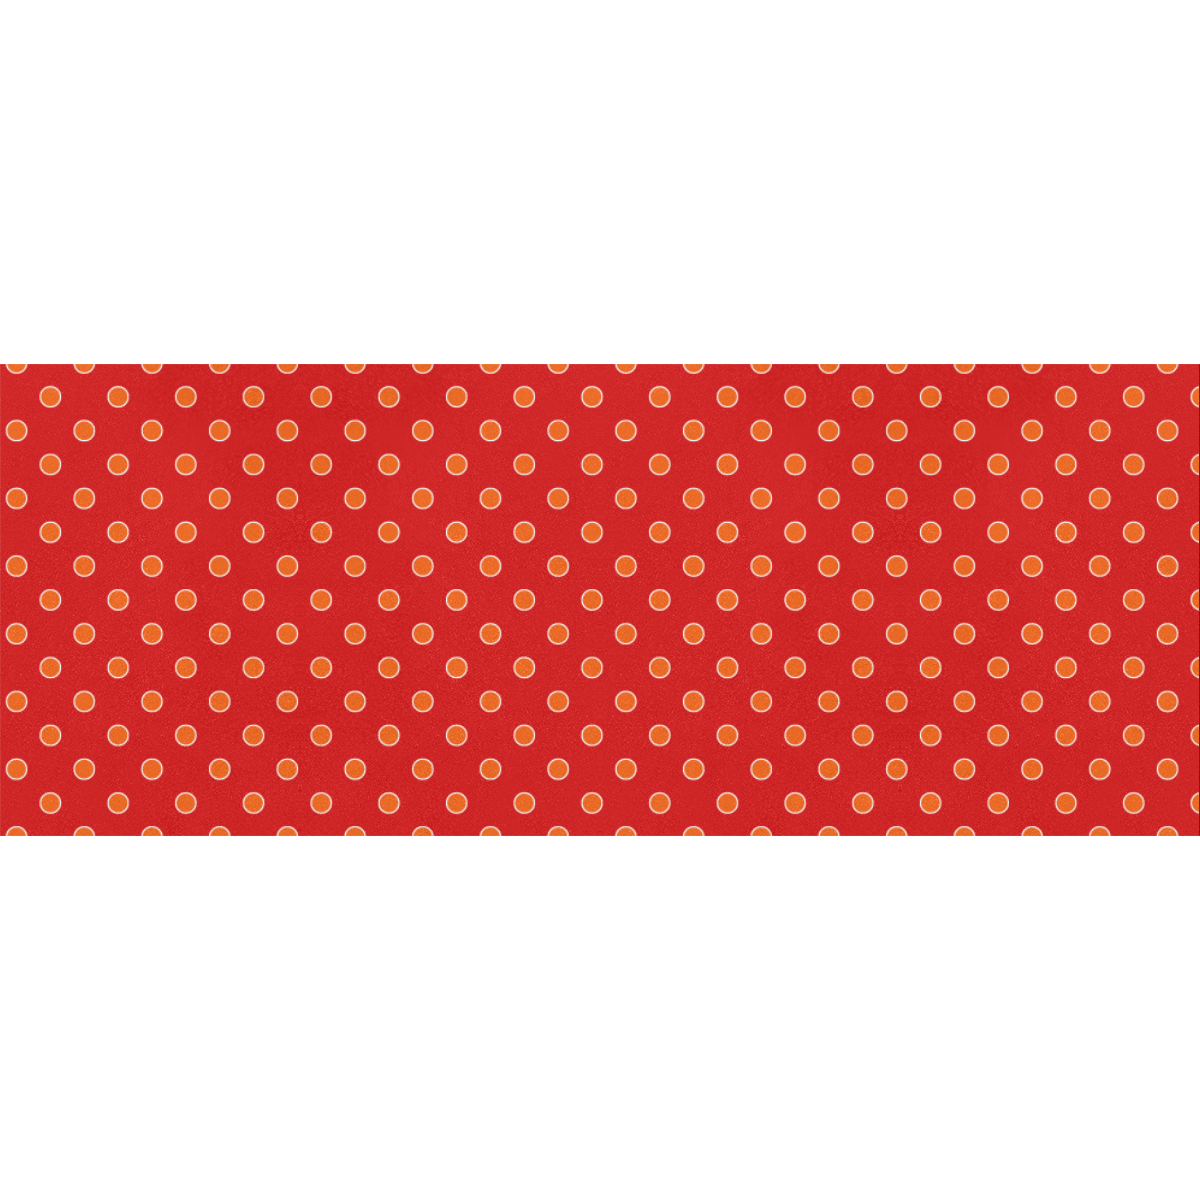 Orange Tangerine Polka Dots on Red Gift Wrapping Paper 58"x 23" (5 Rolls)